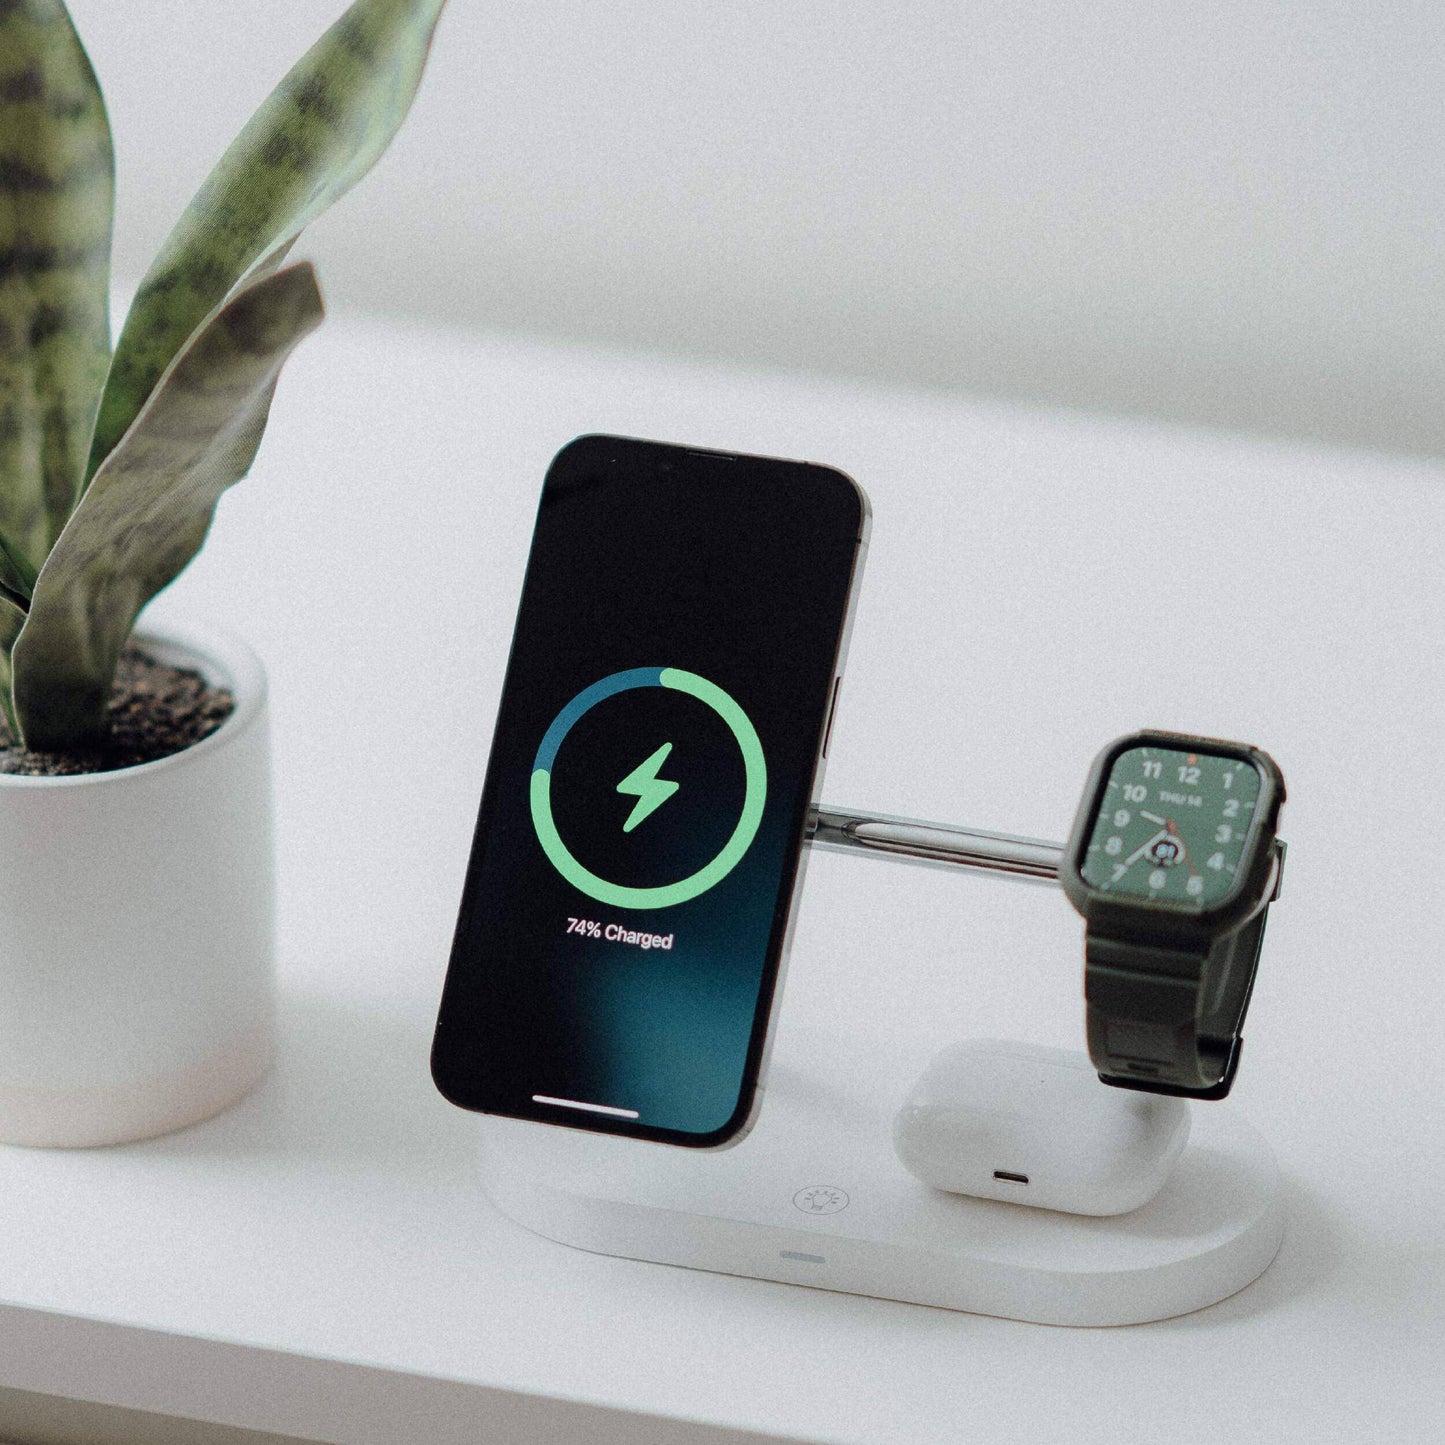 SpaceControl 3-in-1 Magnetic Wireless Charger